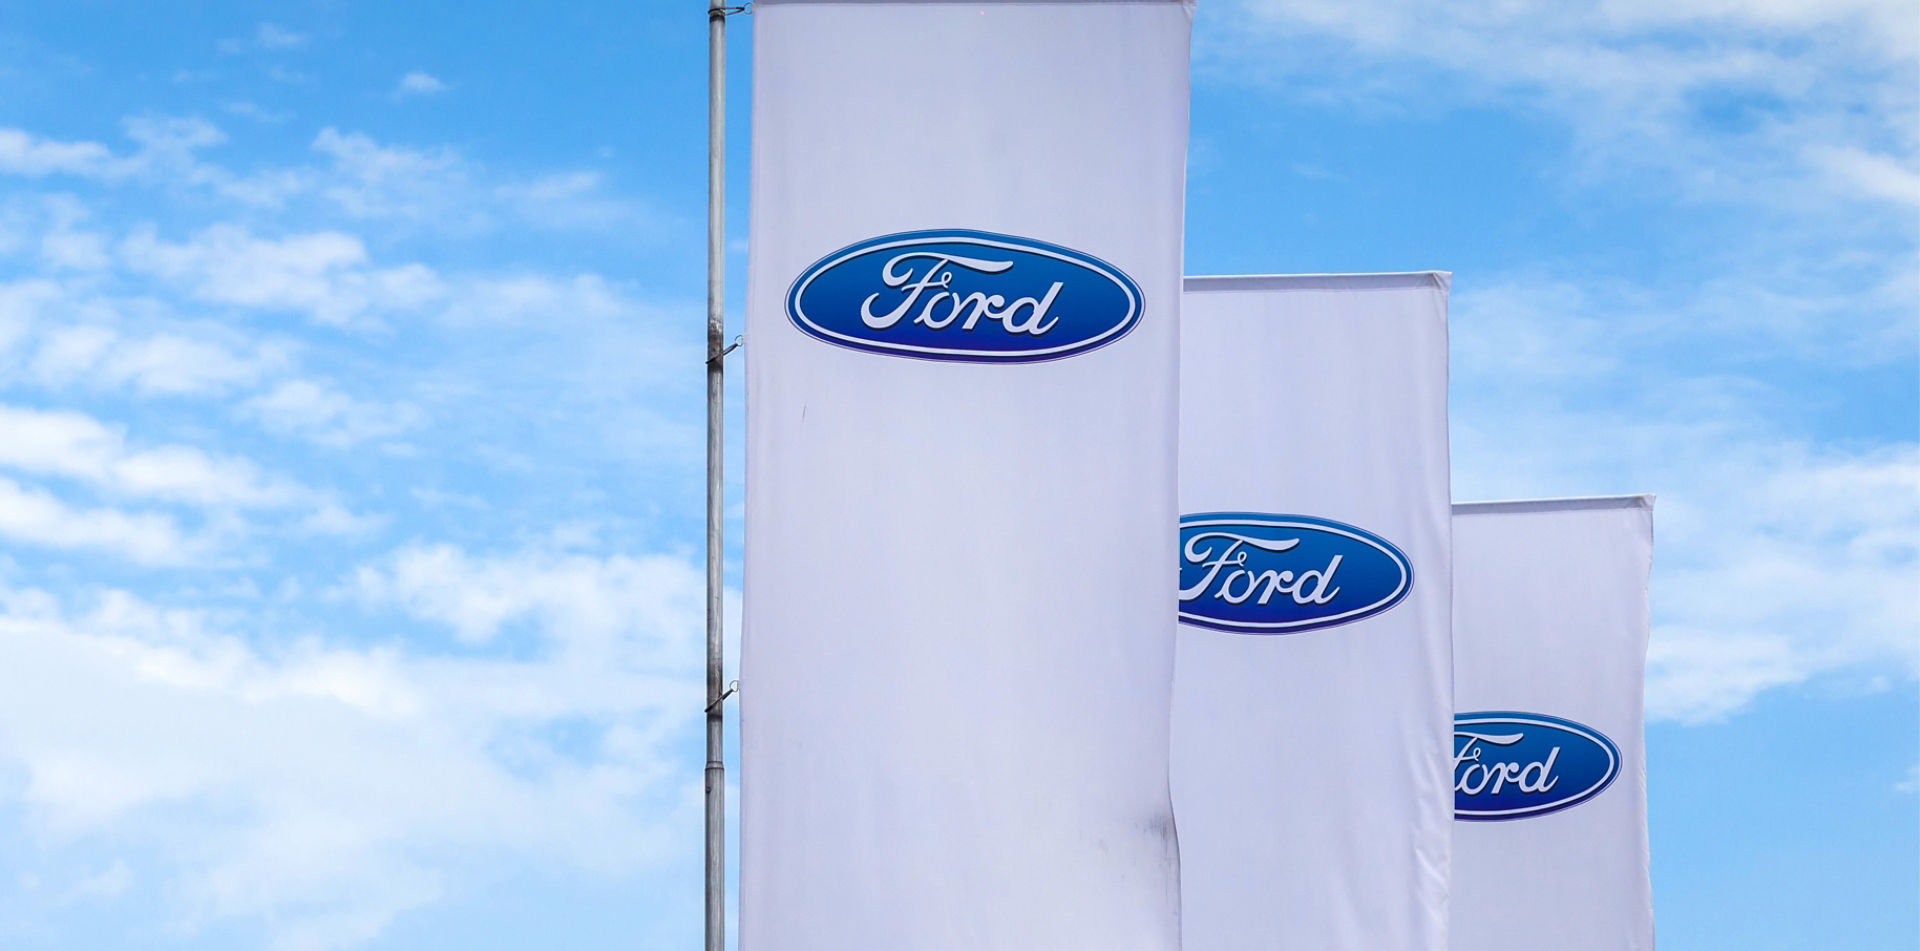 07 of August 2017 - Vinnitsa, Ukraine. Showroom of  FORD logo on a stand